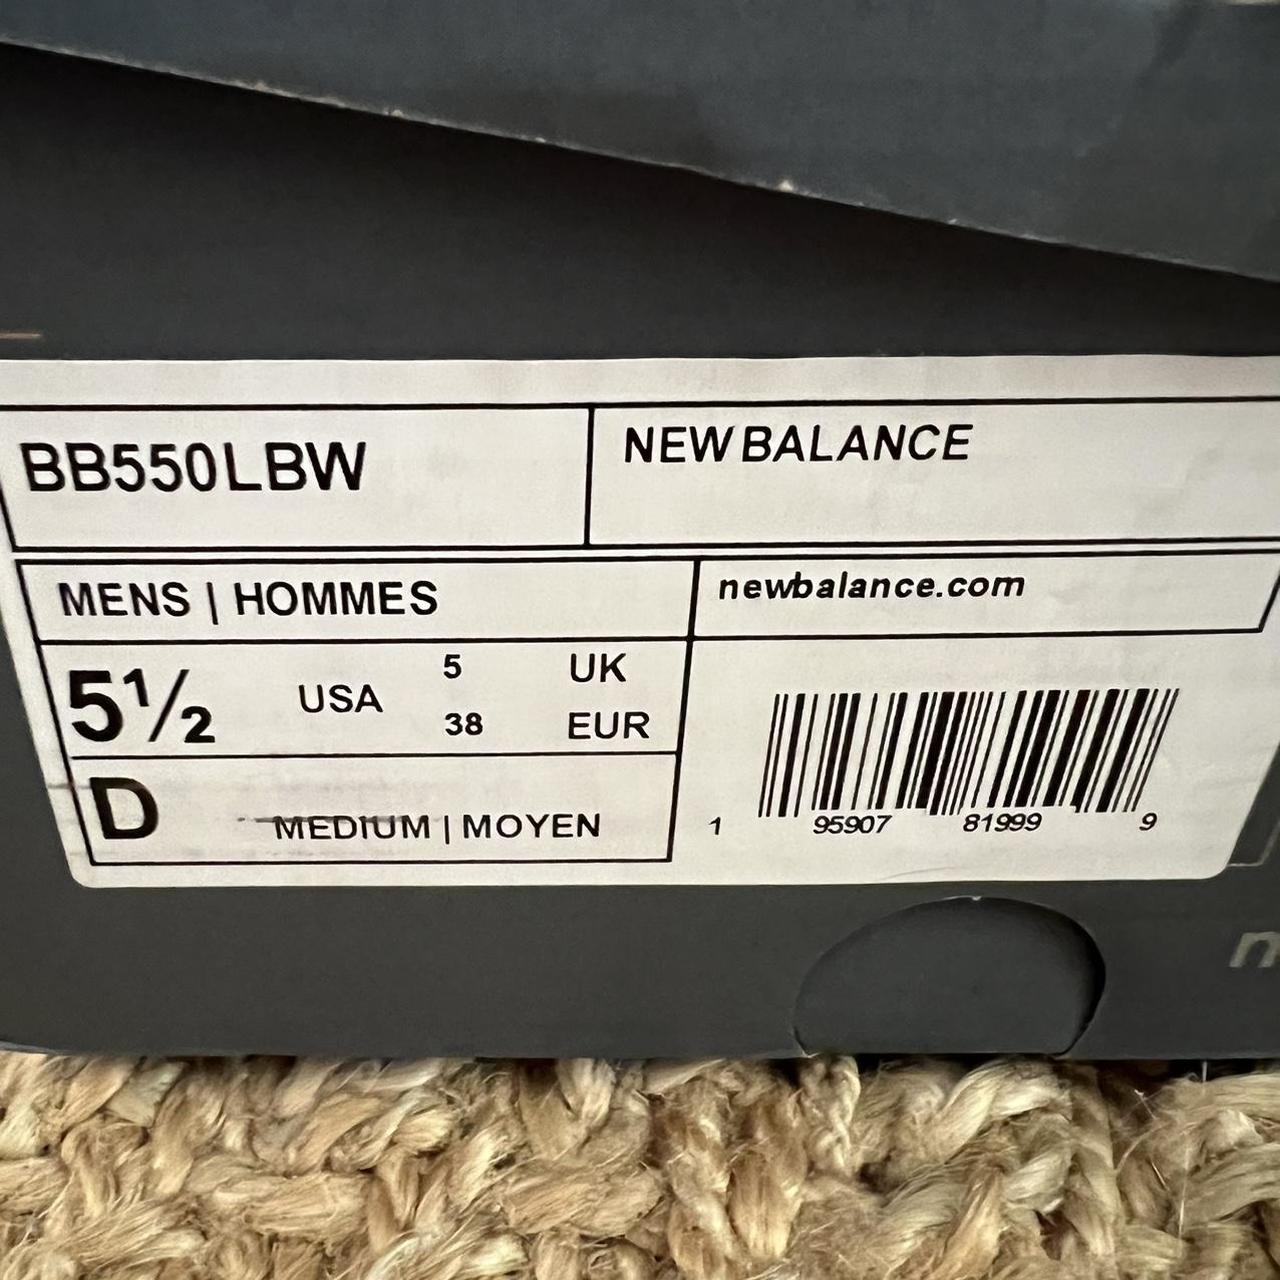 New Balance Women's Black and White Trainers (4)